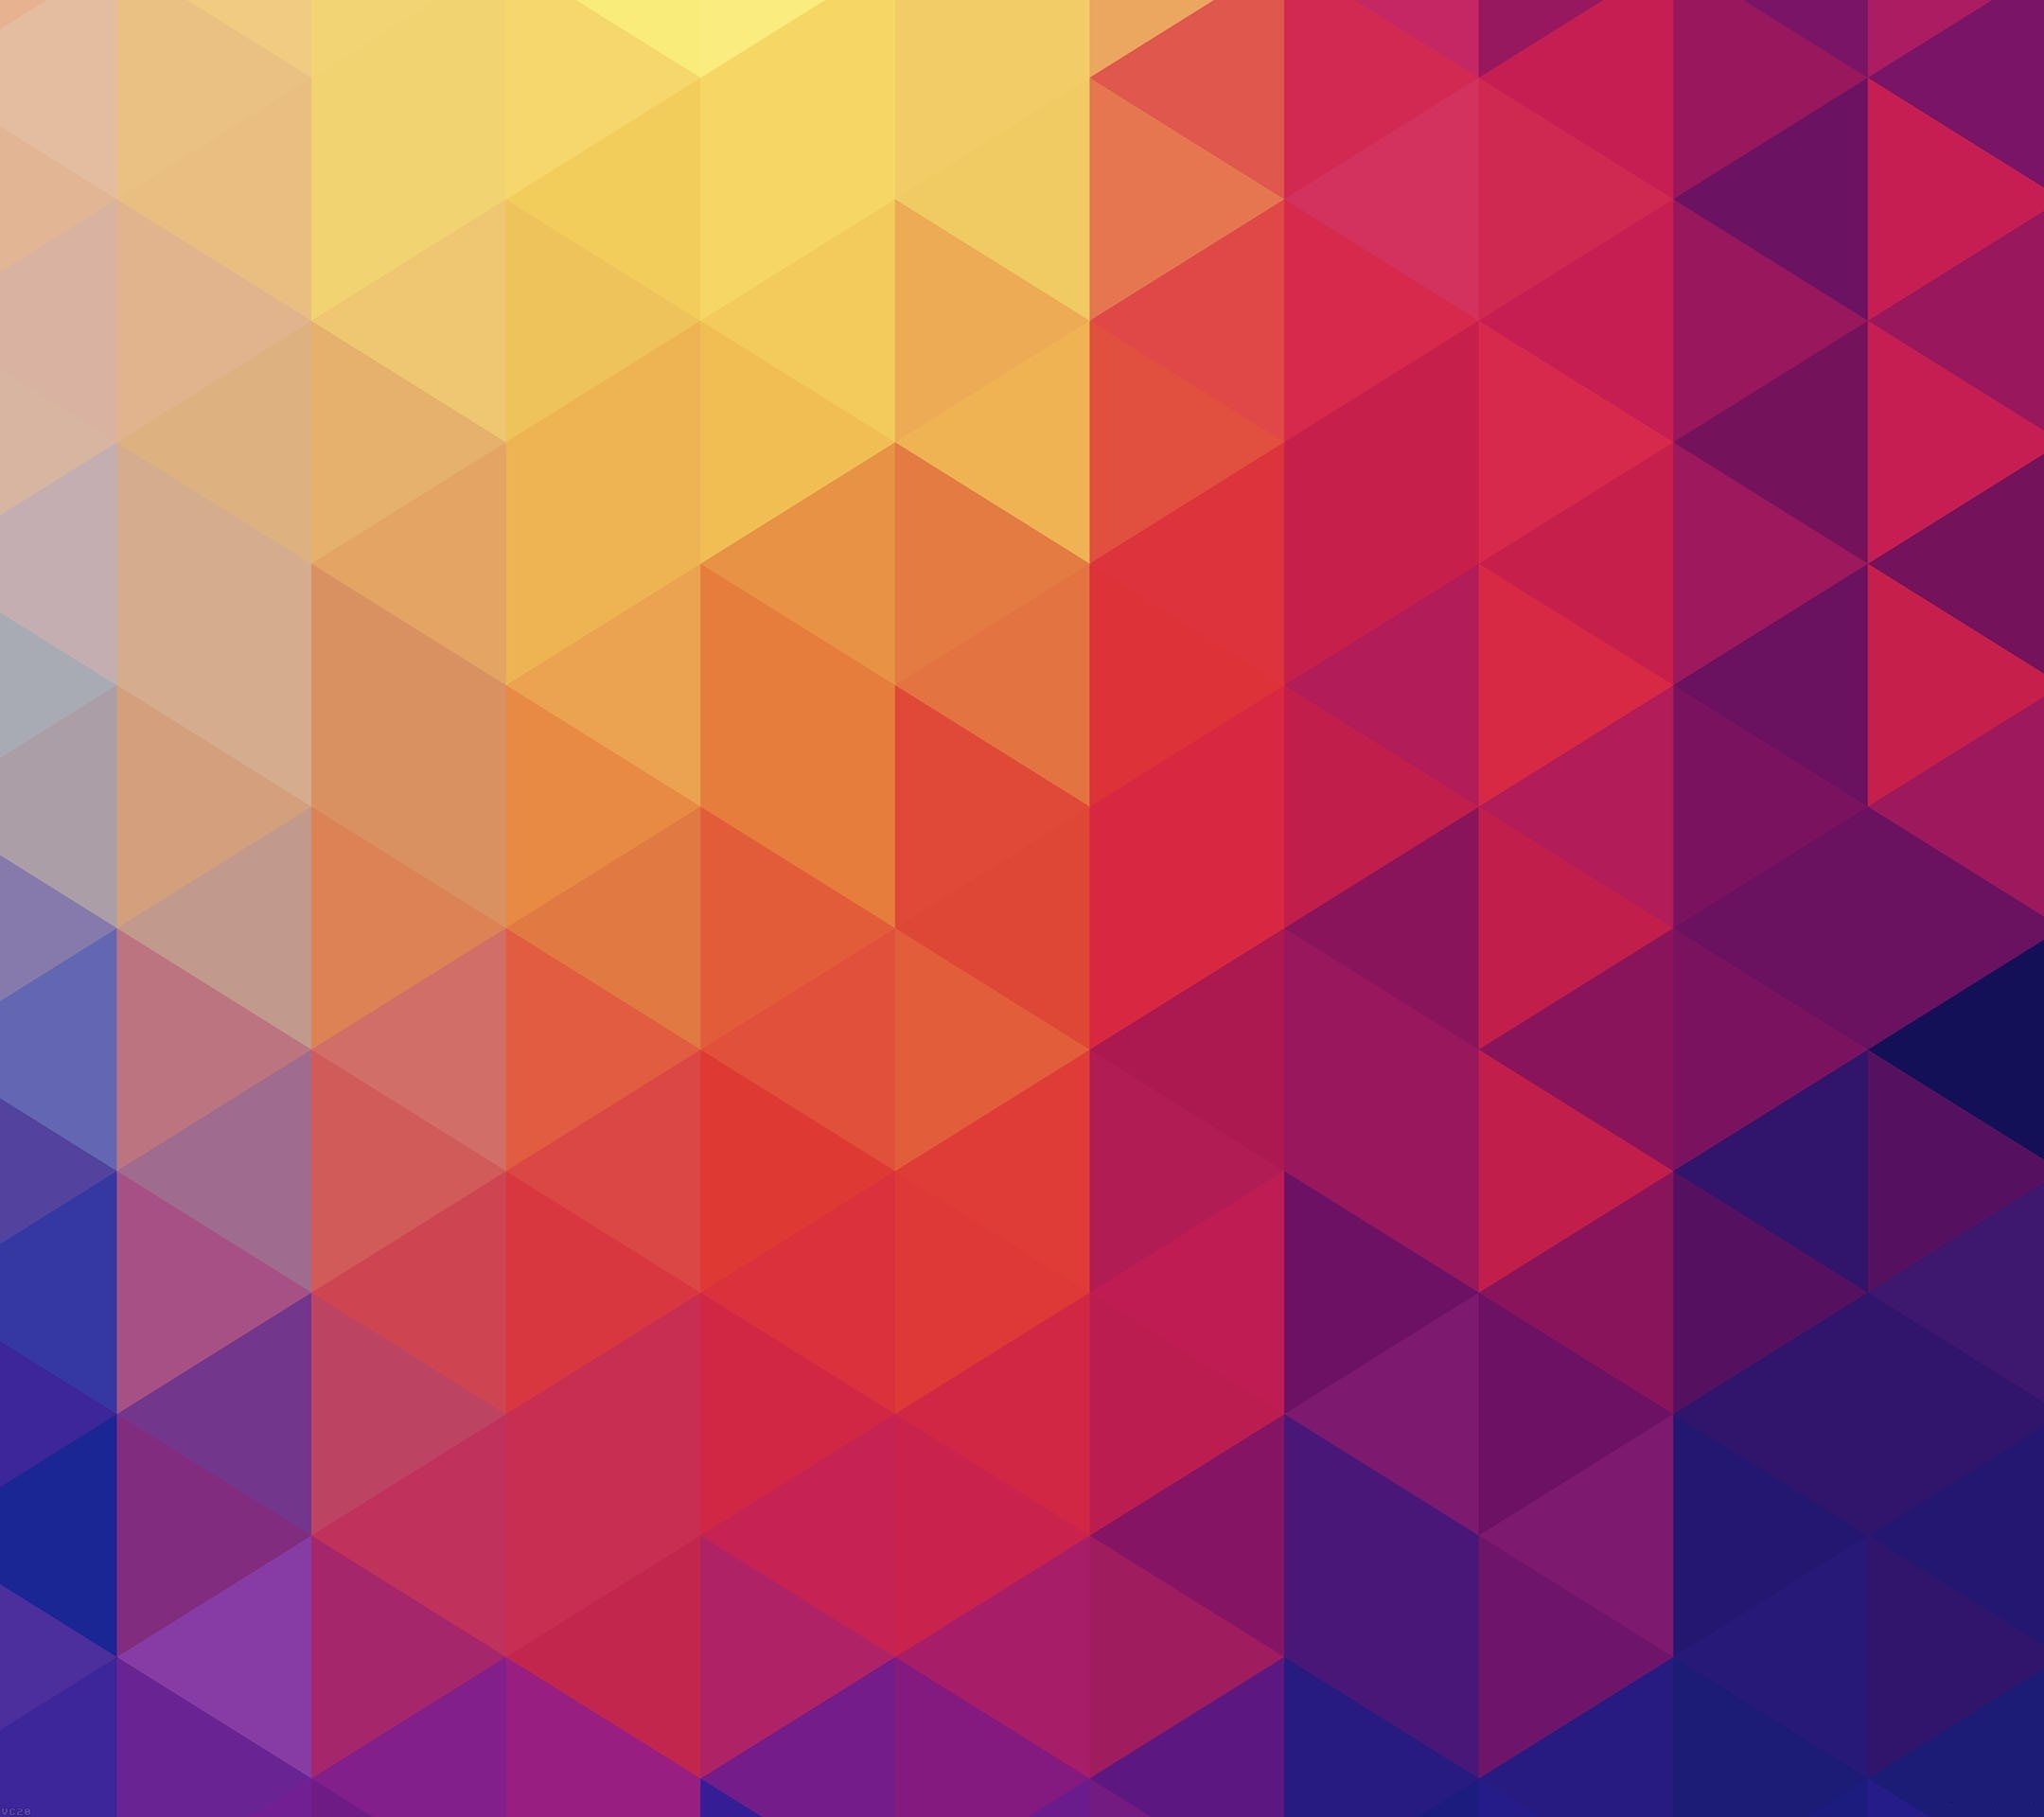 Warm Tone Gradient to see more low #polygon #geometric